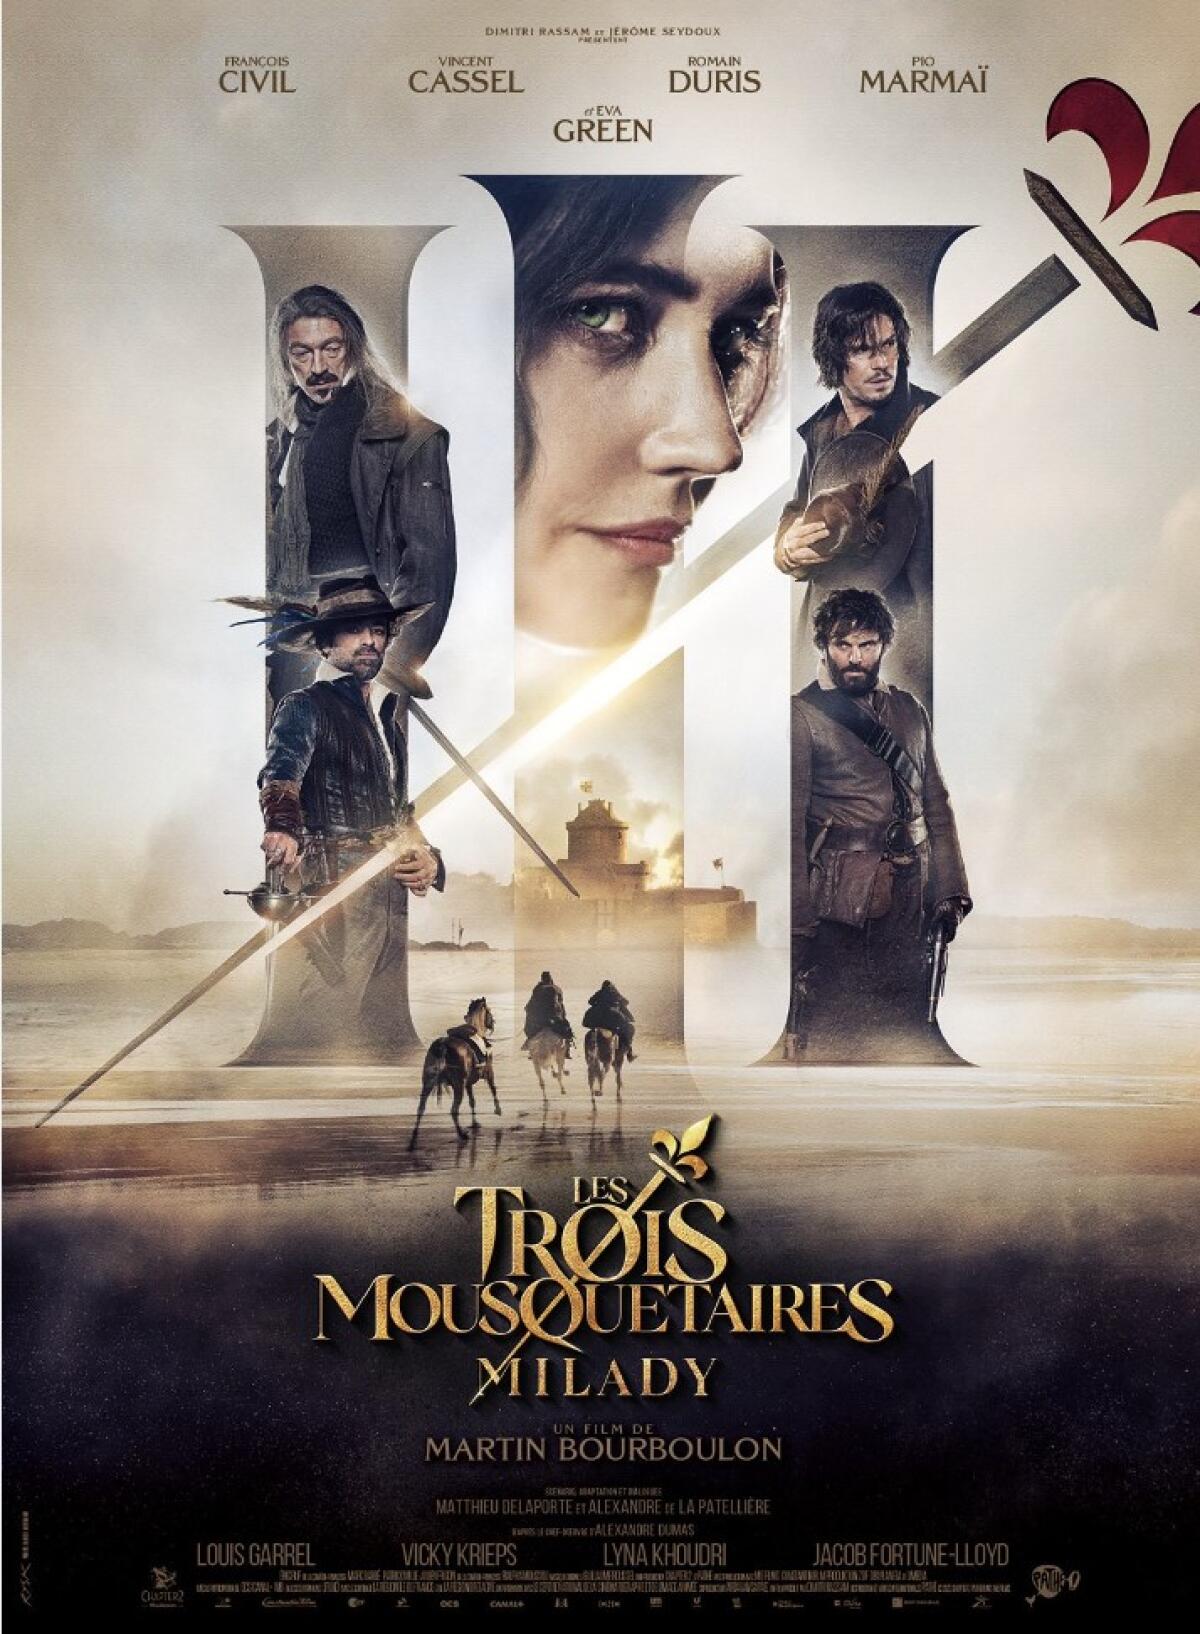 "Les Trois Mousquetaires: Milady" ("The Three Musketeers") will be screened as part of the San Diego French Film Festival.